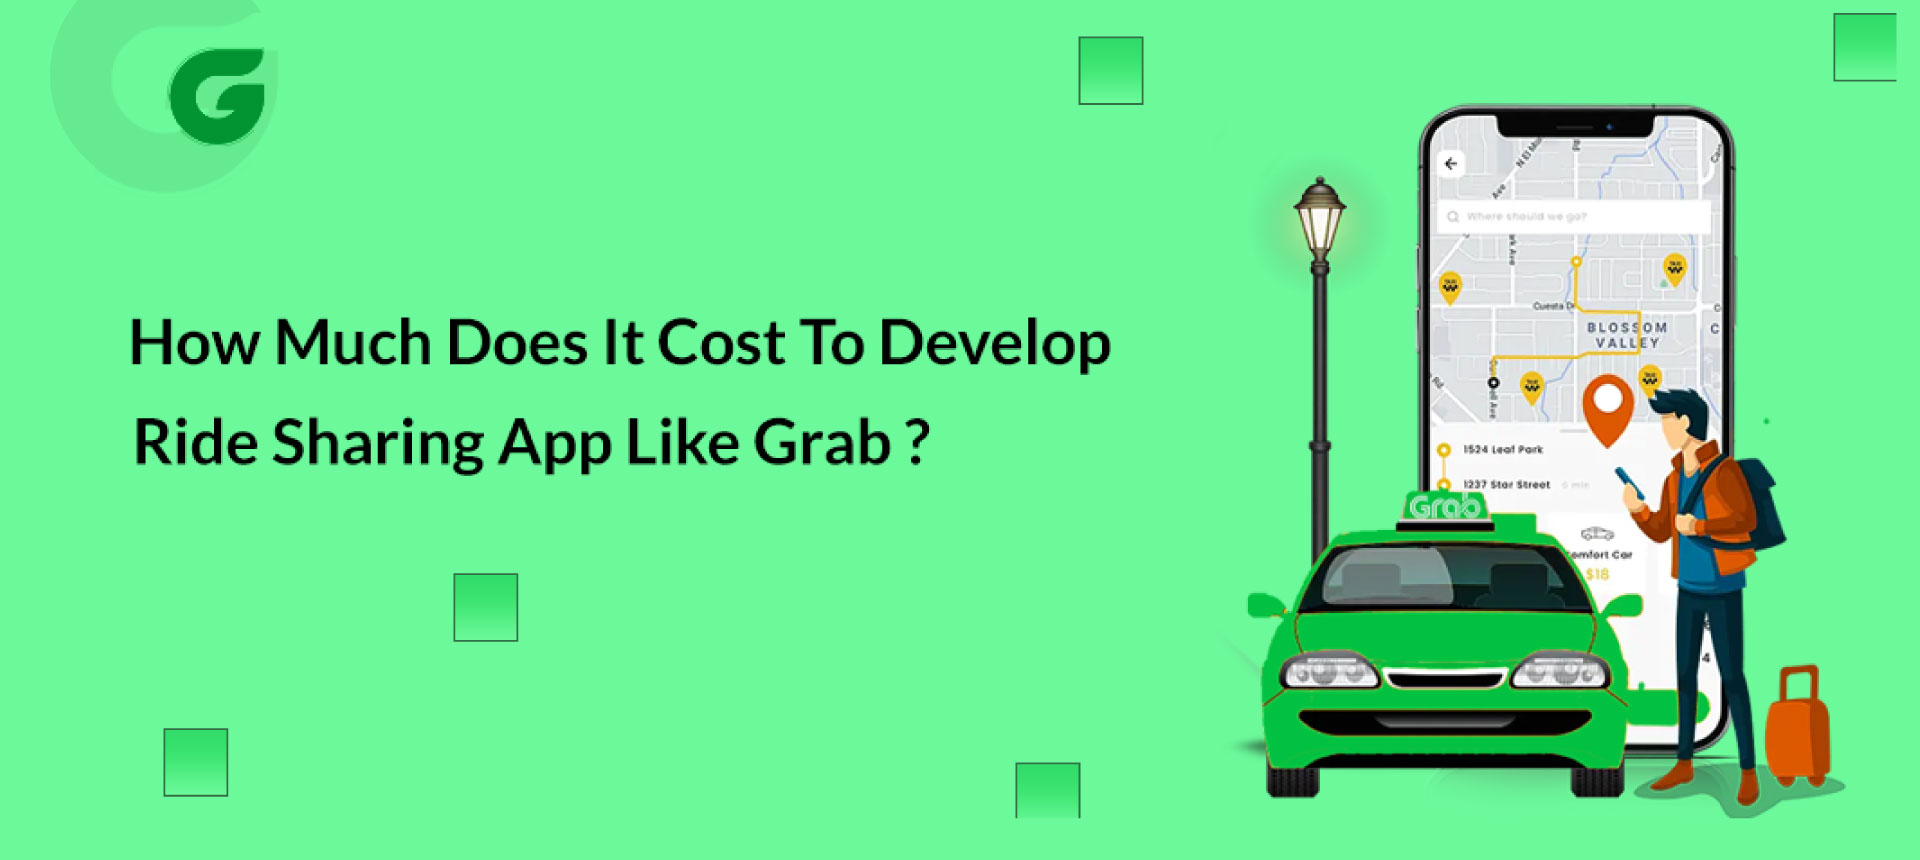 How much does it cost to develop an app like grab